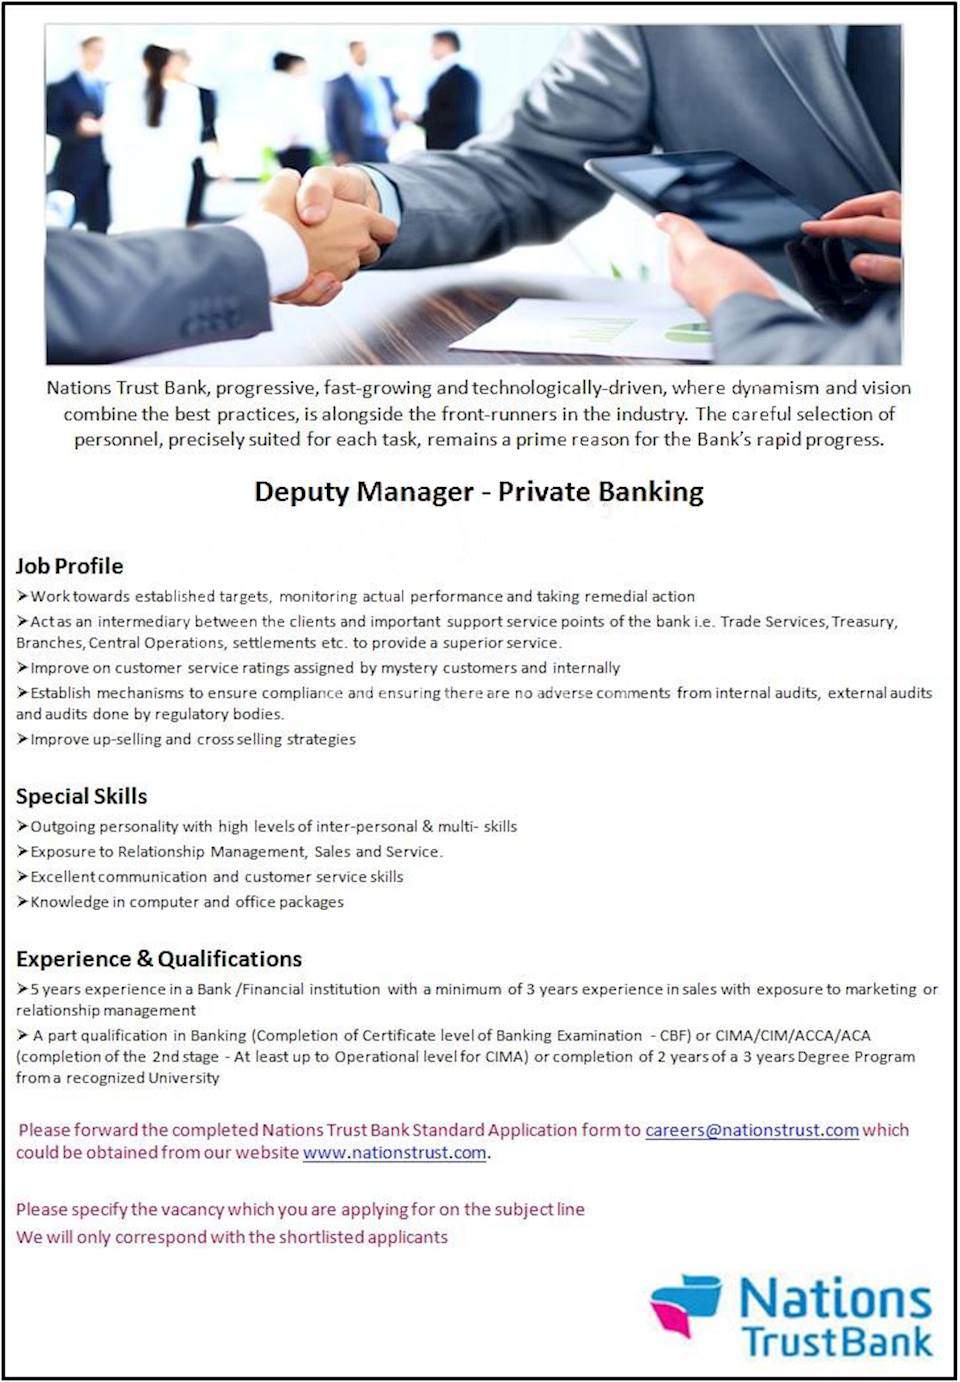 Deputy Manager - Private Banking